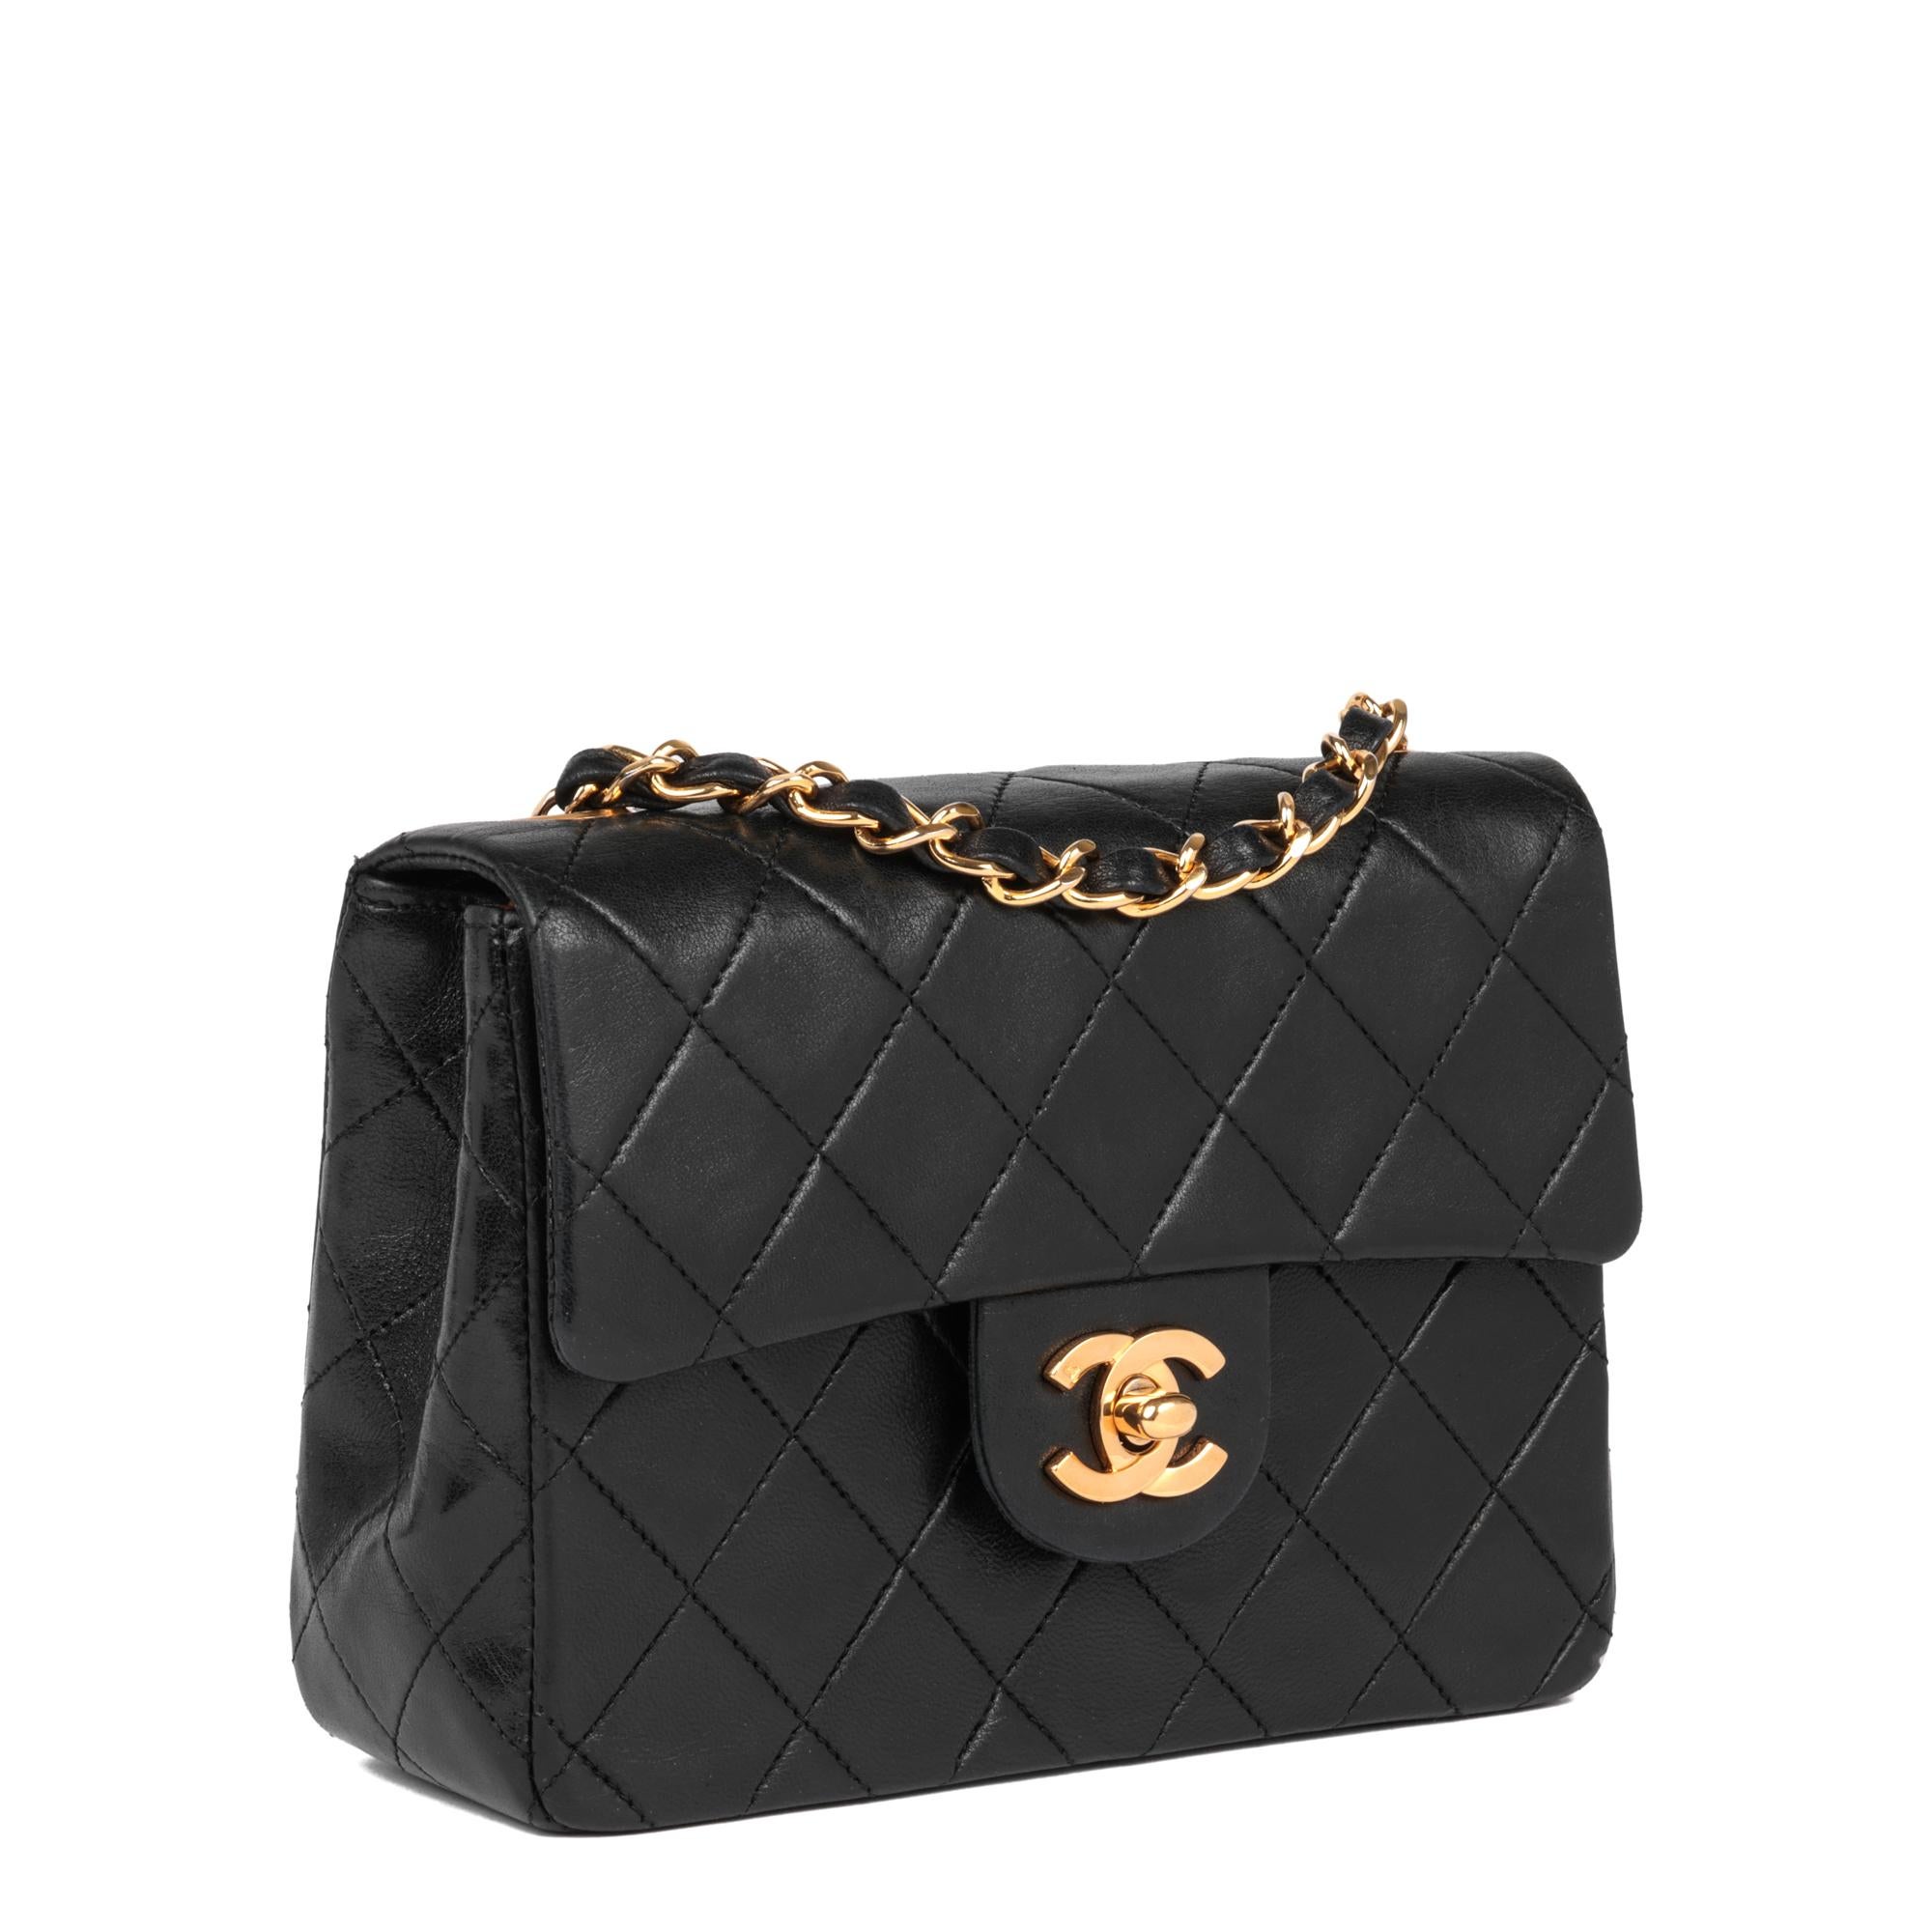 CHANEL
Black Quilted Lambskin Vintage Square Mini Flap Bag

Xupes Reference: HB5132
Serial Number: 1200164
Age (Circa): 1991
Accompanied By: Chanel Dust Bag, Authenticity Card
Authenticity Details: Authenticity Card, Serial Sticker (Made in